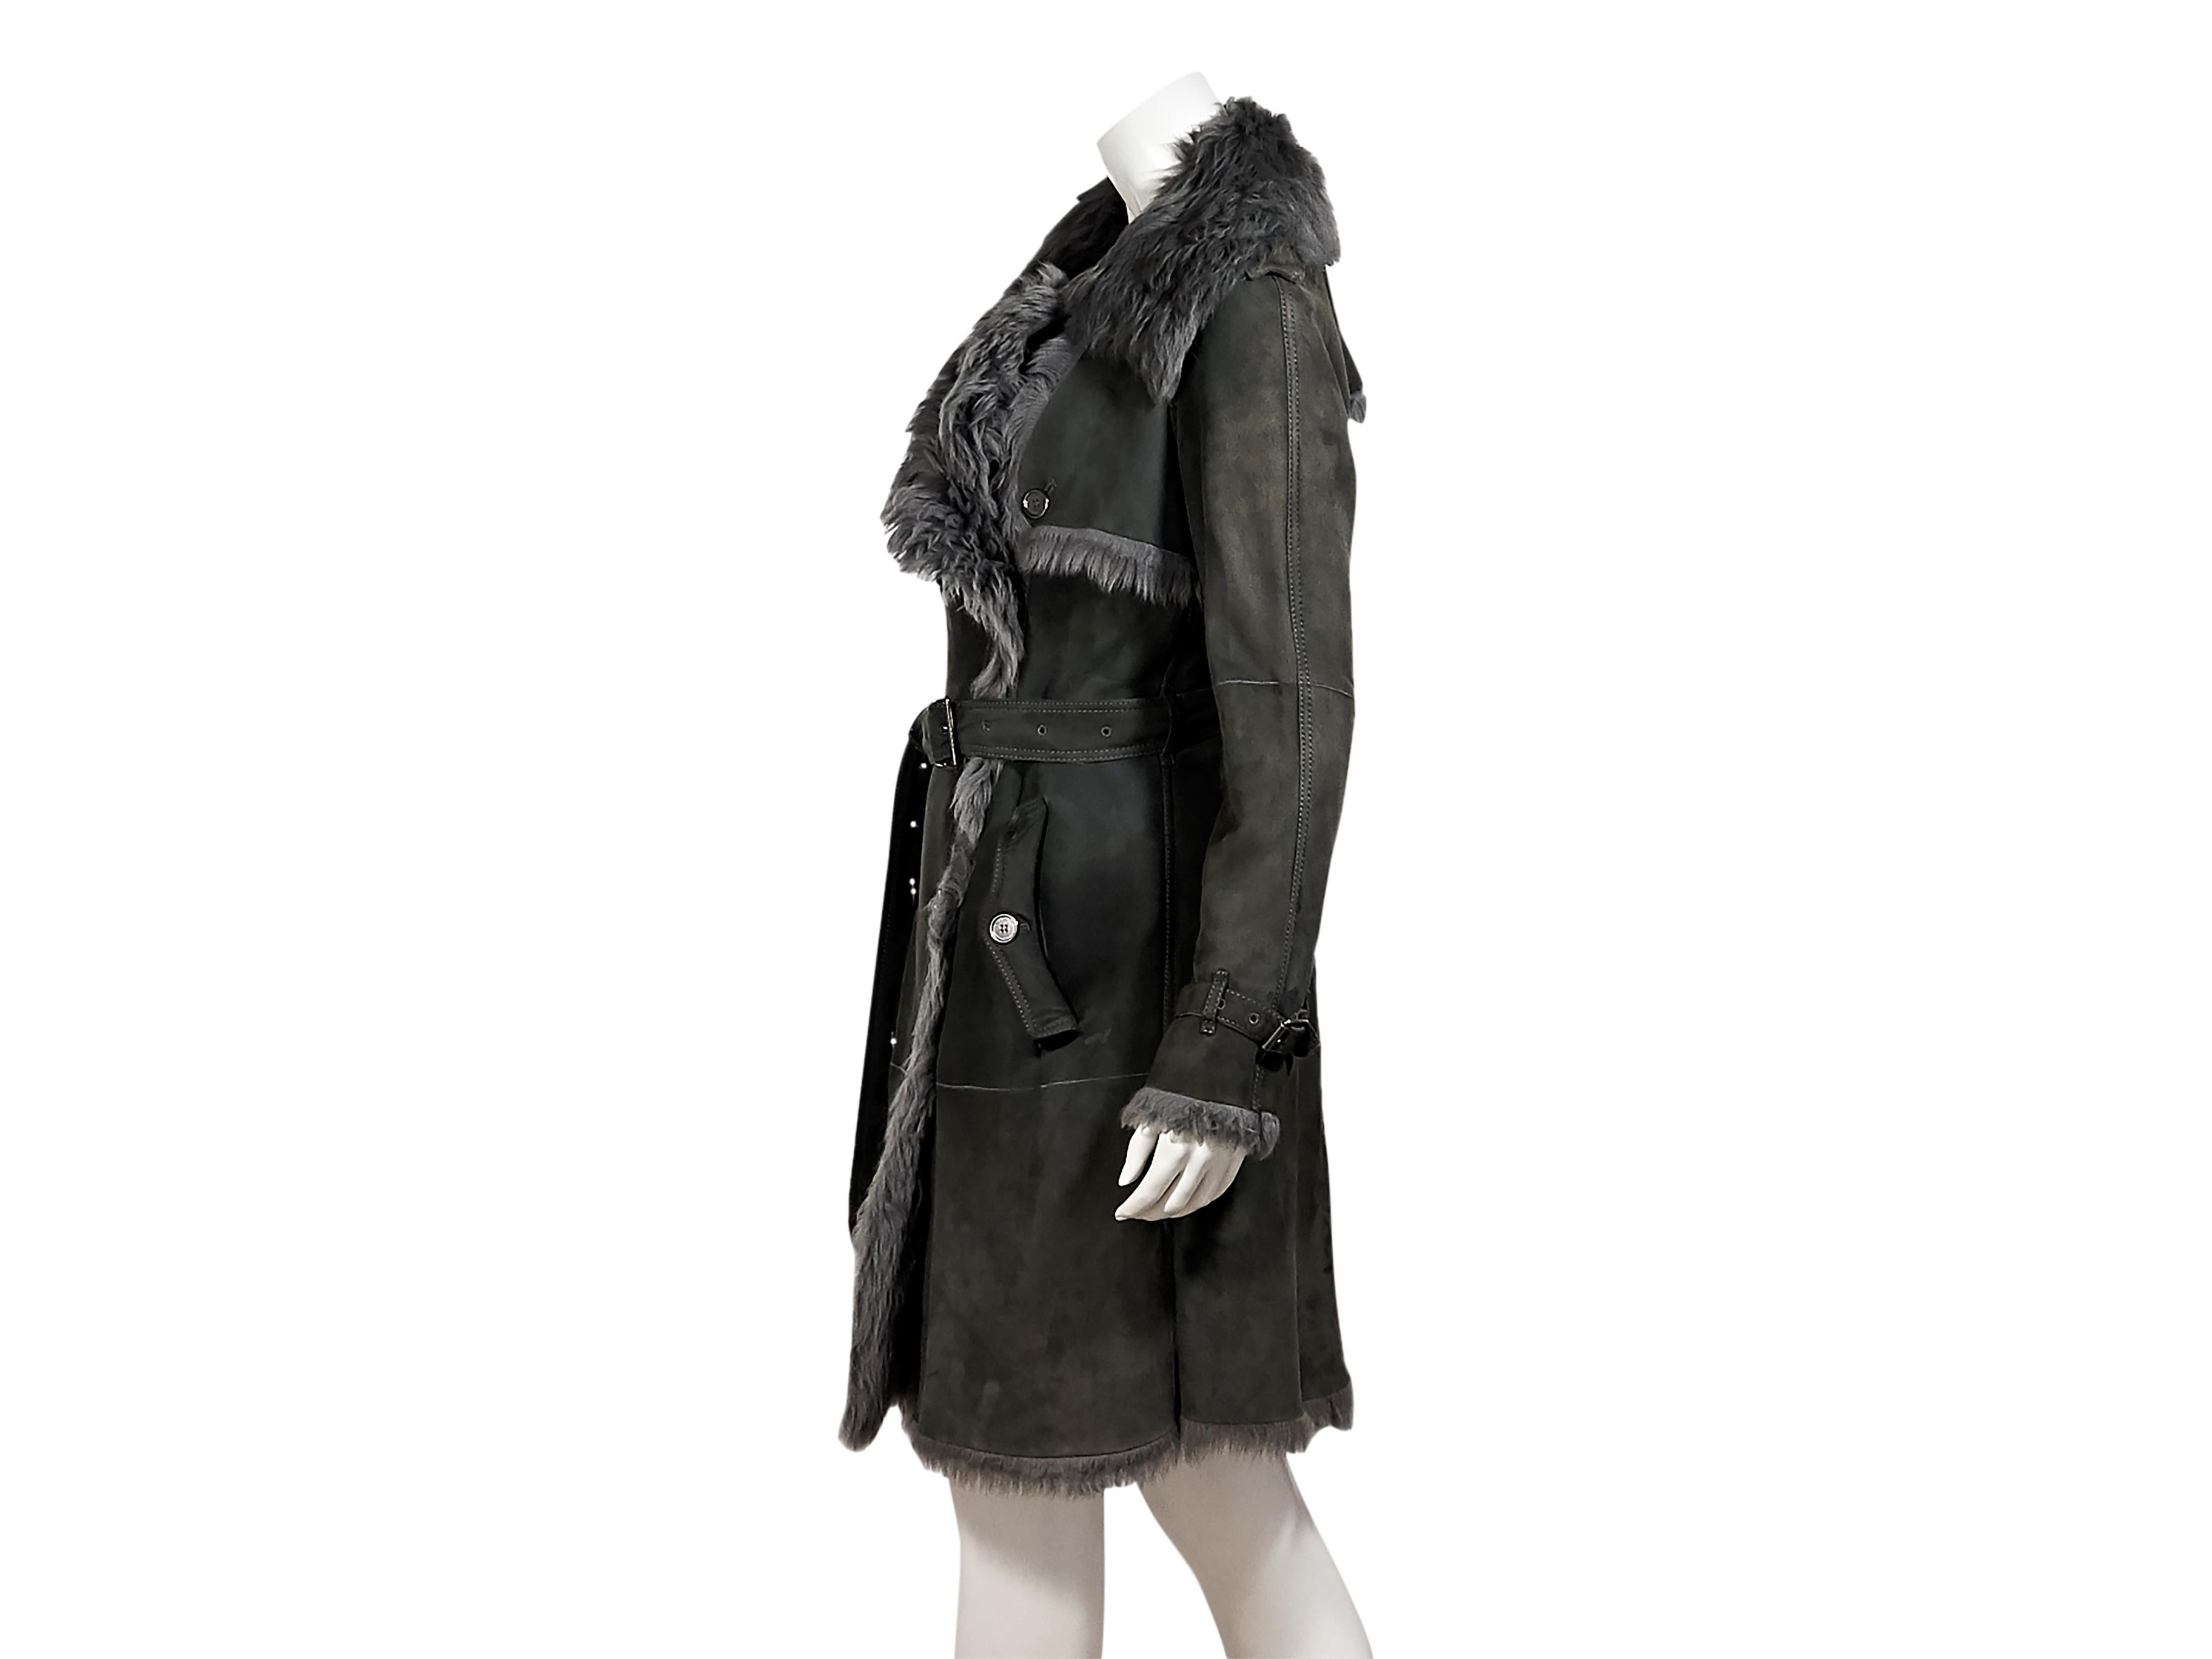 Product details:  Grey shearling trench coat by Burberry London.  Oversized notched lapel.  Long sleeves.  Double-breasted button-front closure.  Adjustable belted waist.  Waist button flap pockets.  Back storm vent and center hem vent.  30